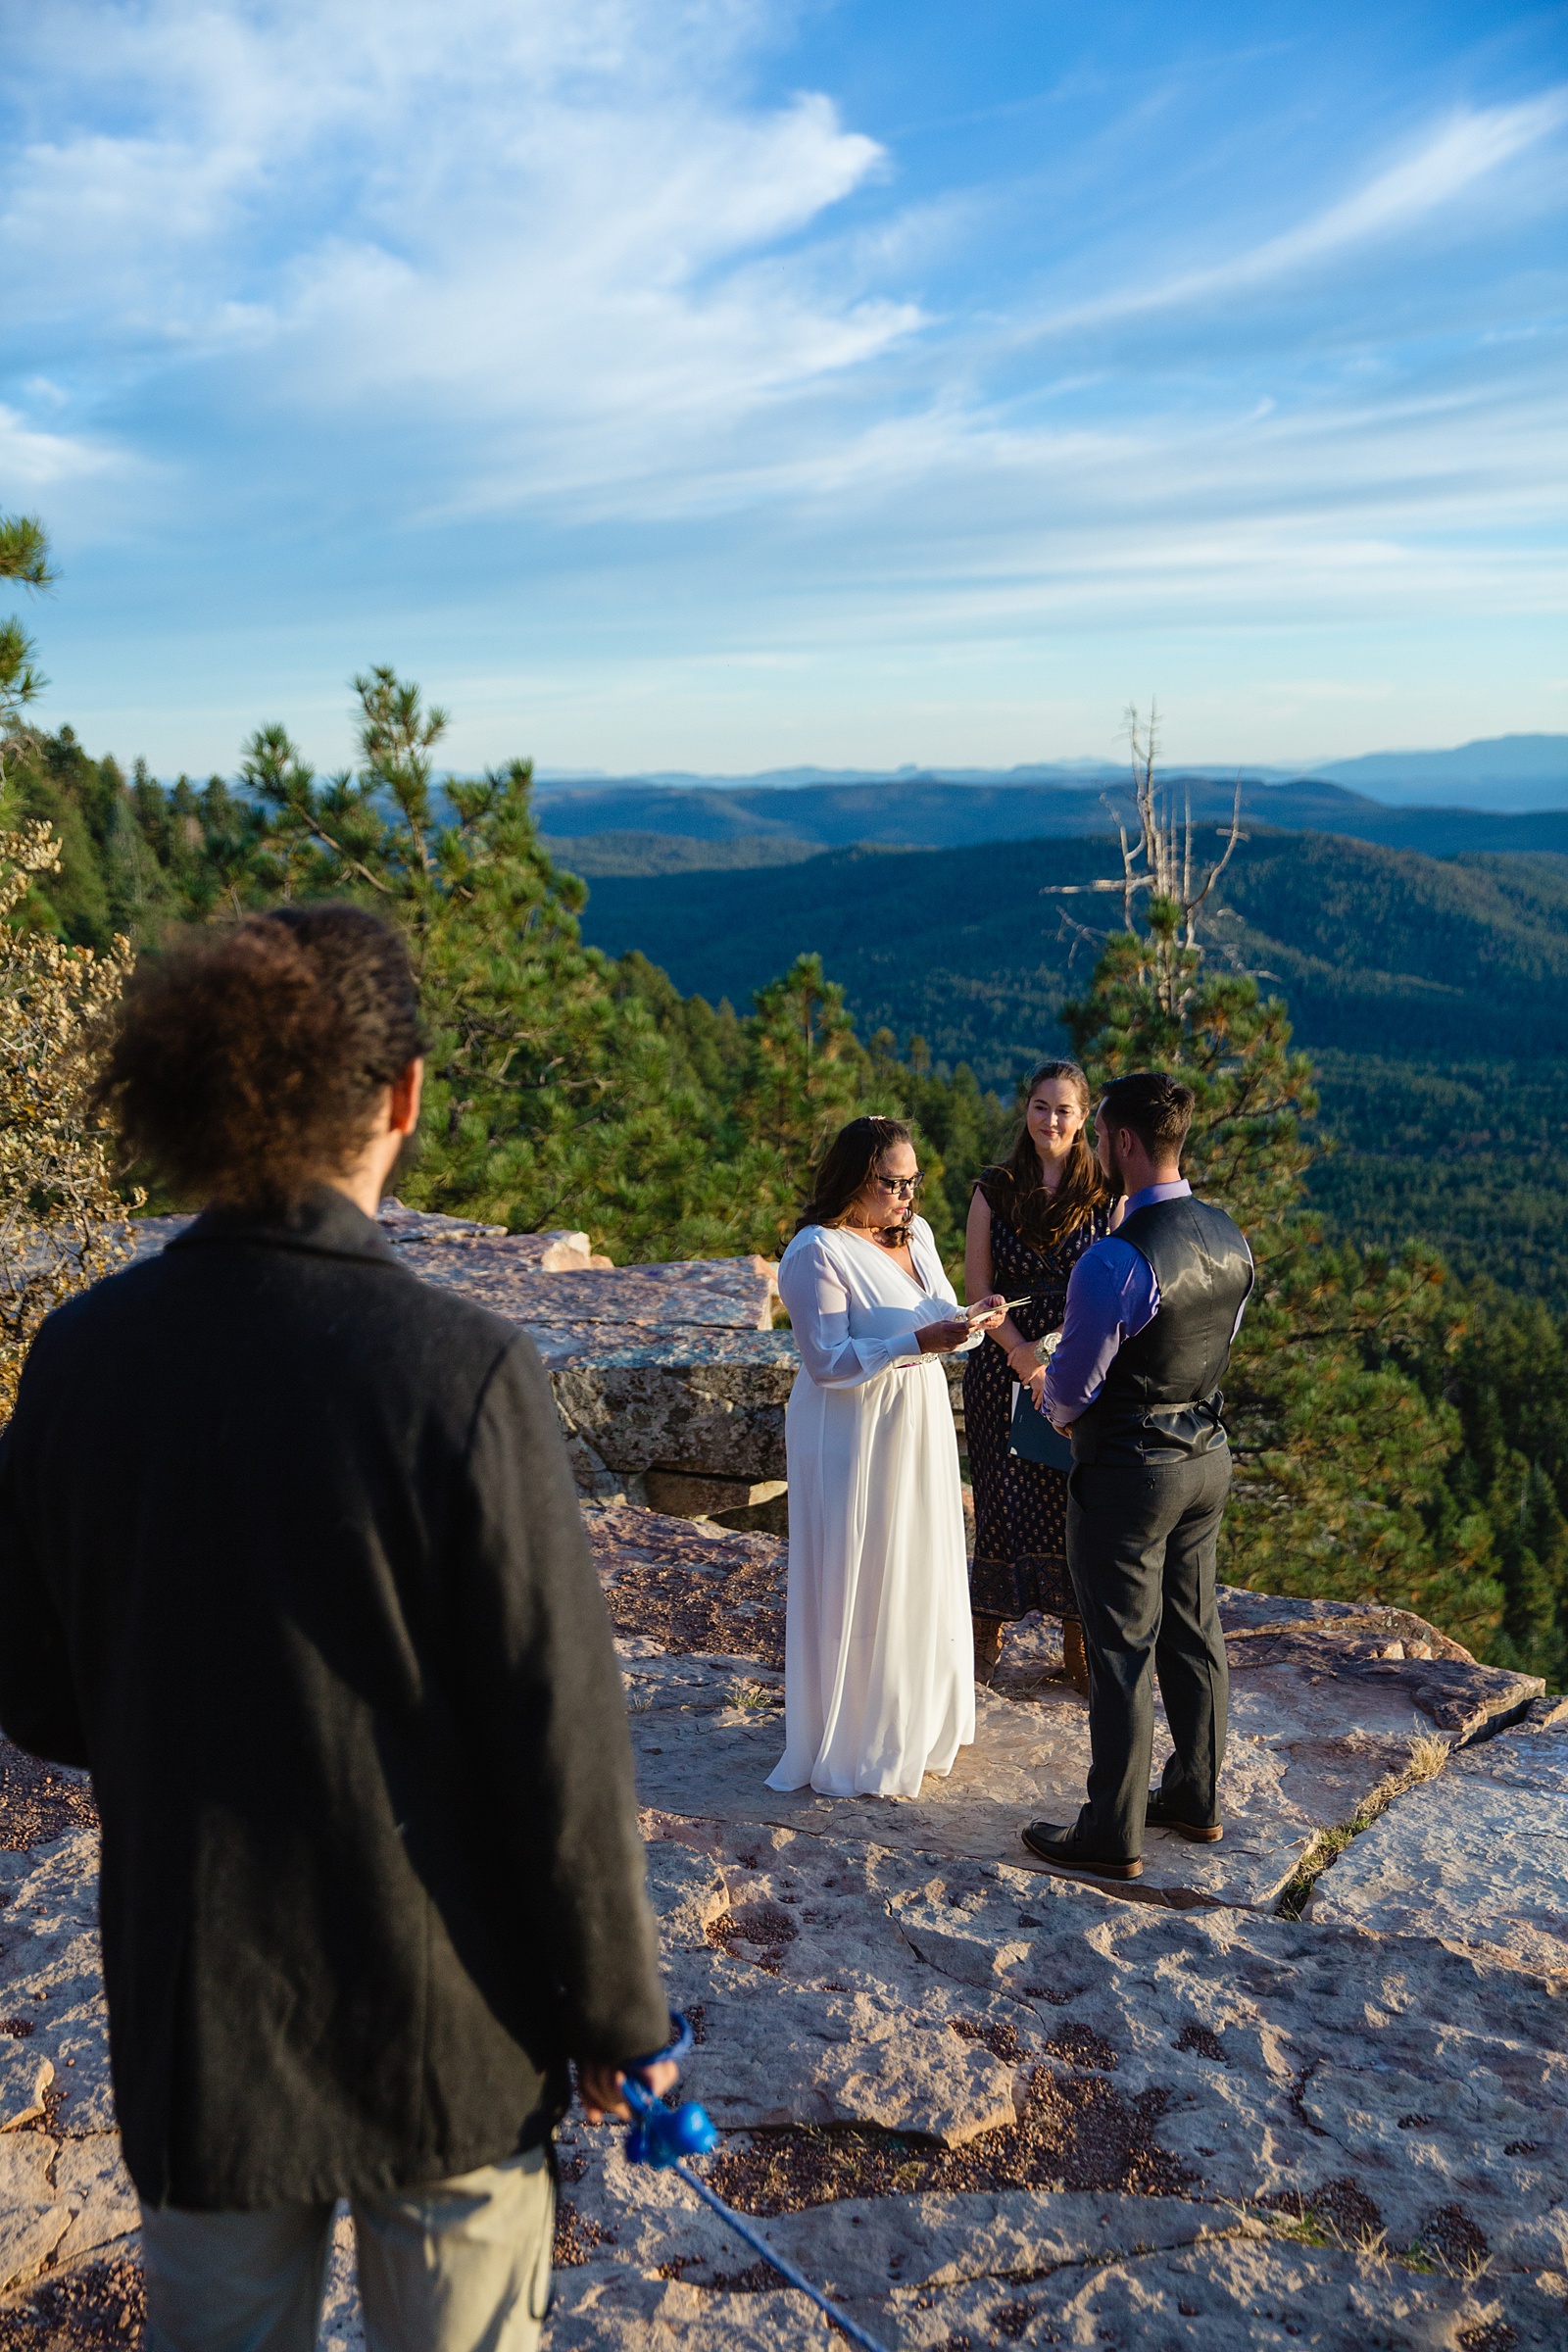 Bride reading her vows during their wedding ceremony at Mogollon Rim by Payson elopement photographer PMA Photography.